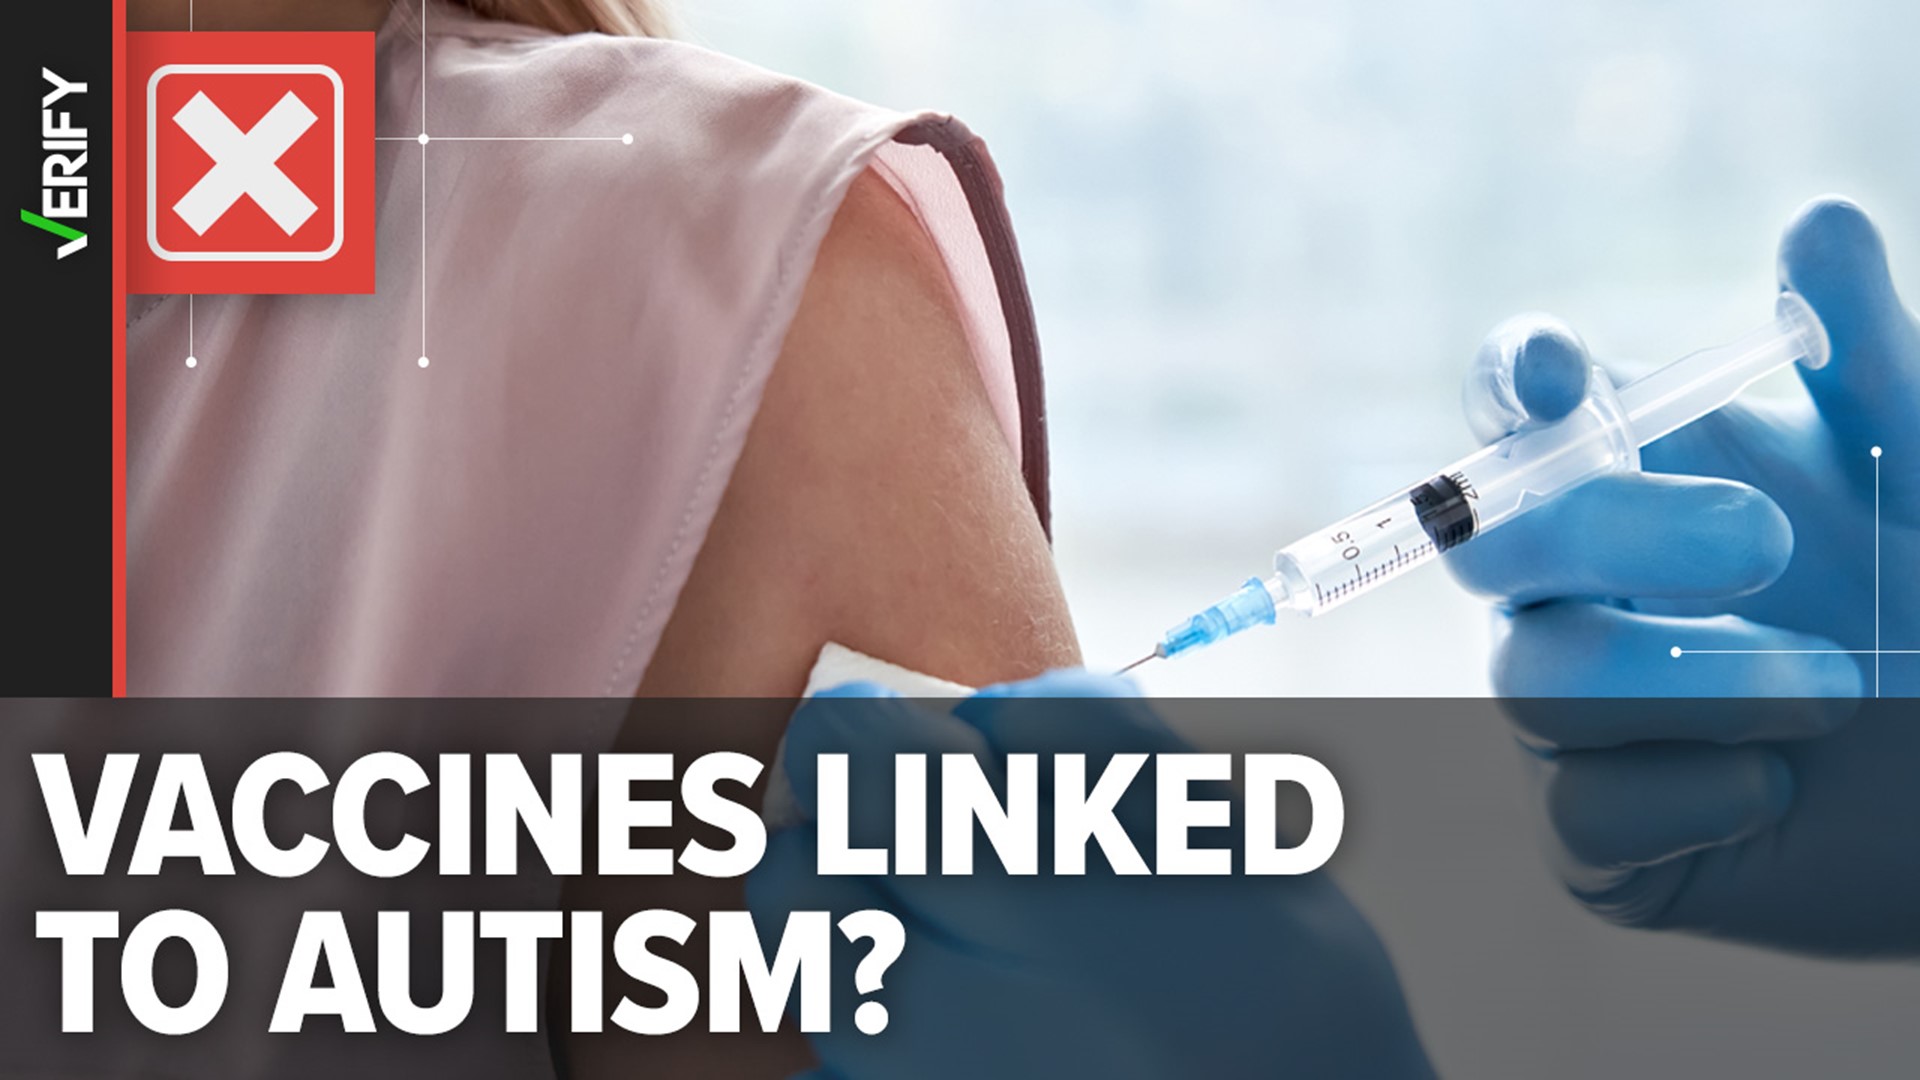 The claim gained momentum after a 1998 study suggested the MMR vaccine caused autism in children. But that study was retracted more than a decade ago.